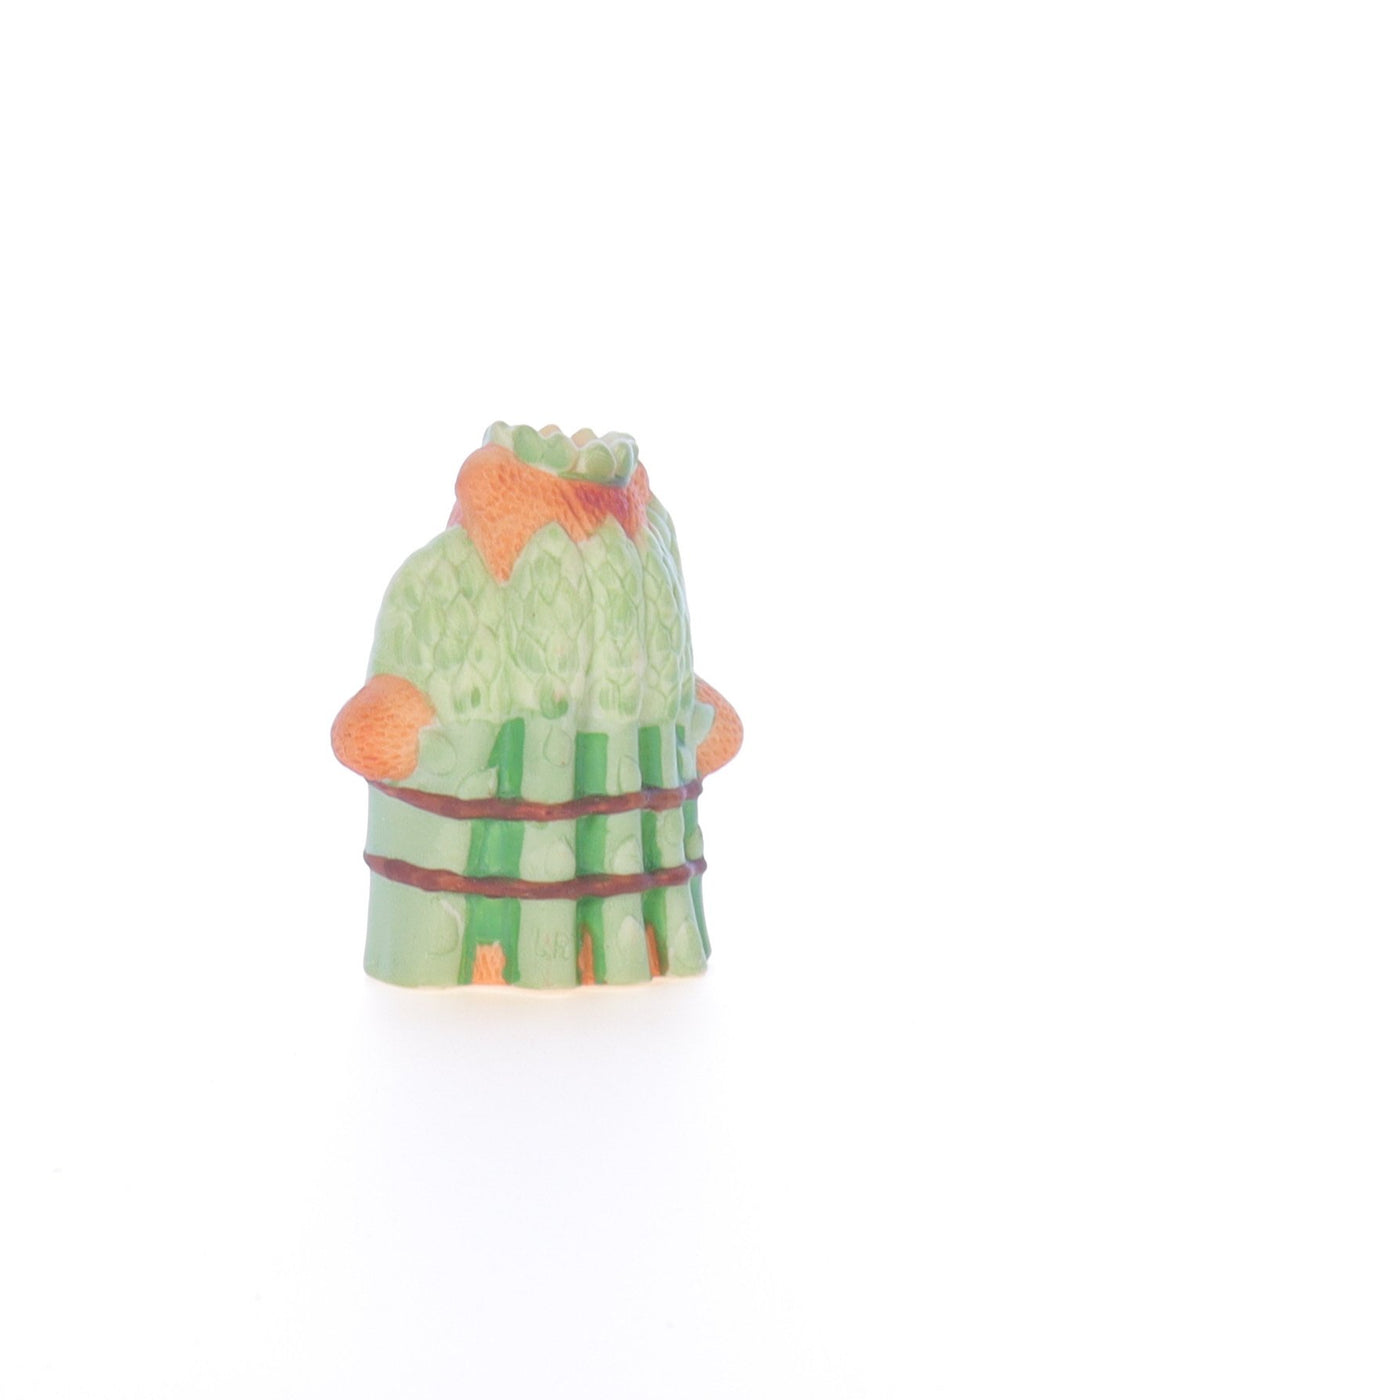 Lucy_And_Me_by_Lucy_Atwell_Porcelain_Figurine_Princess_Bear_in_Asparagus_Costume_Lucy_Unknown_042_04